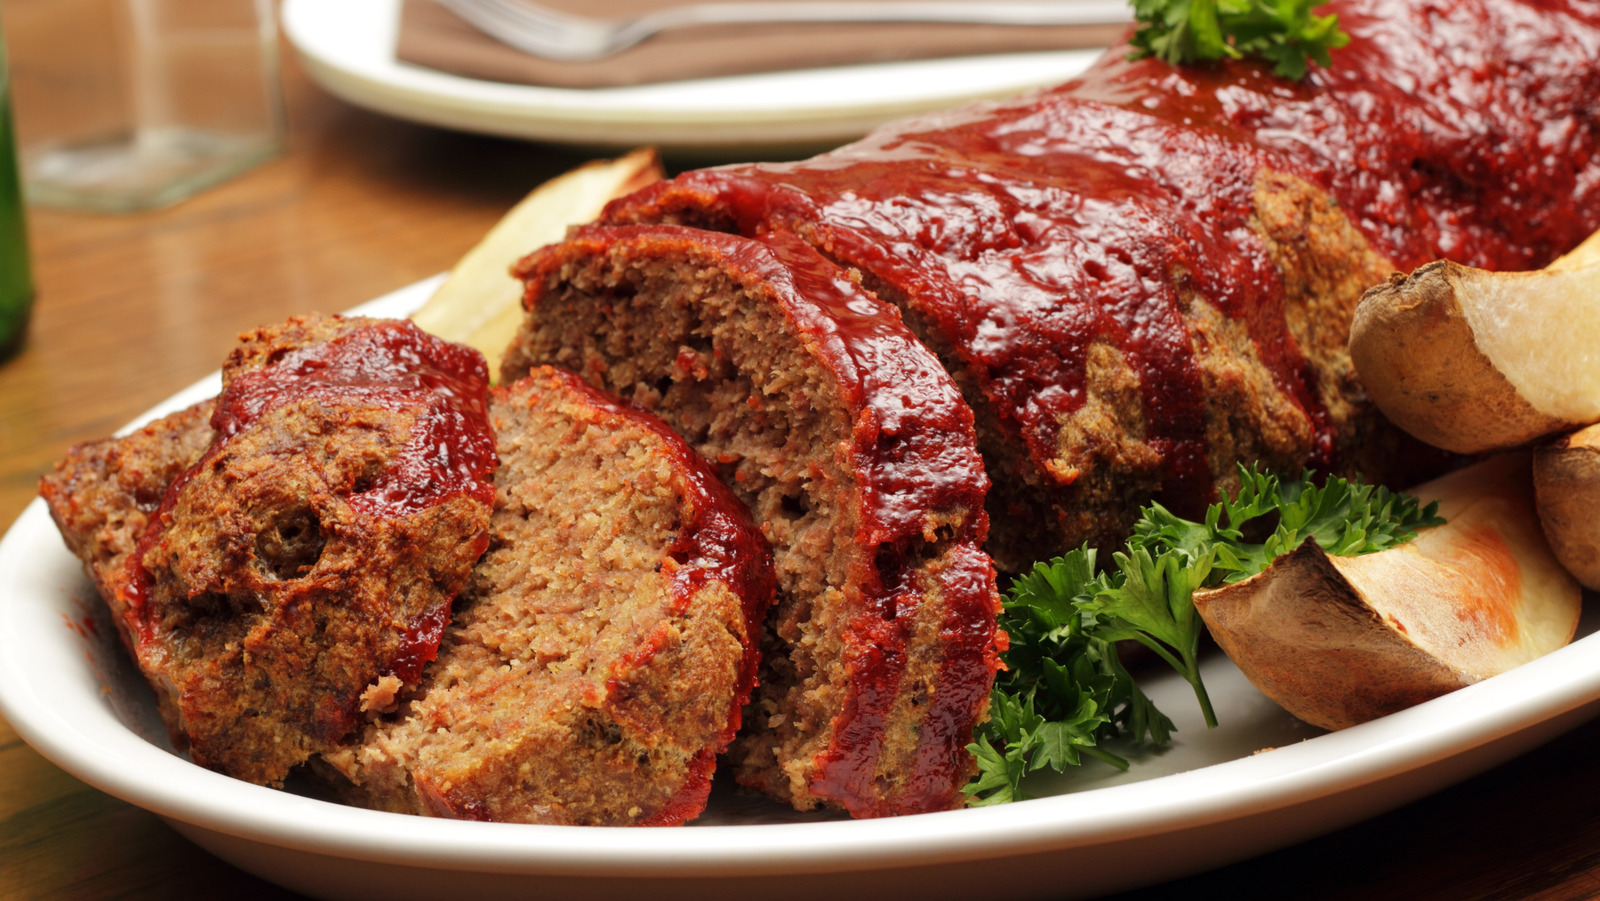 Perfect Meatloaf Pan Set - Does it Work?